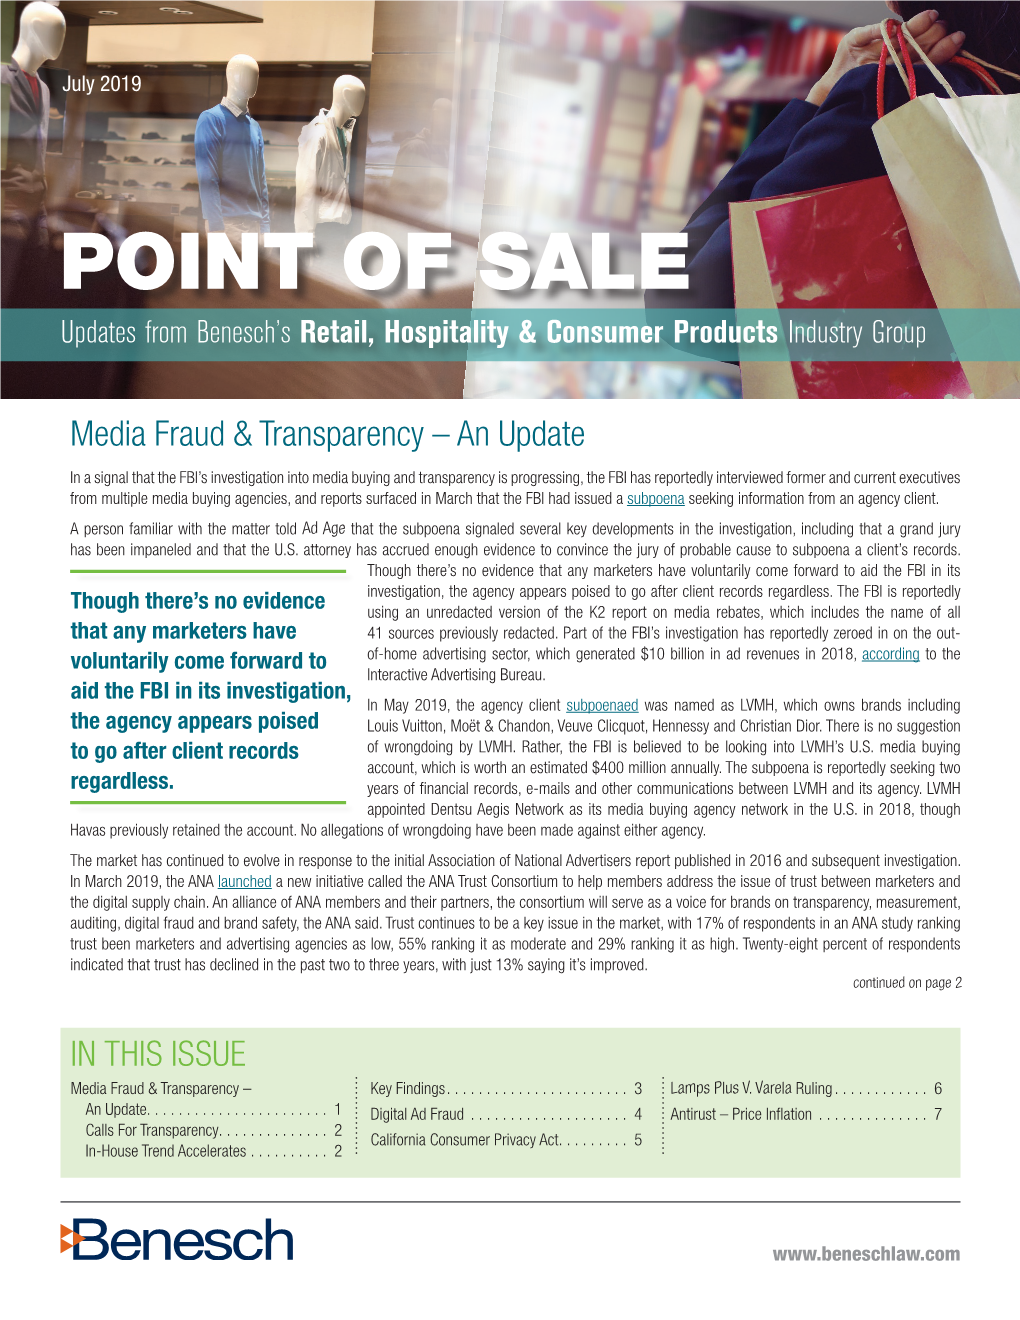 Point of Sale Newsletter